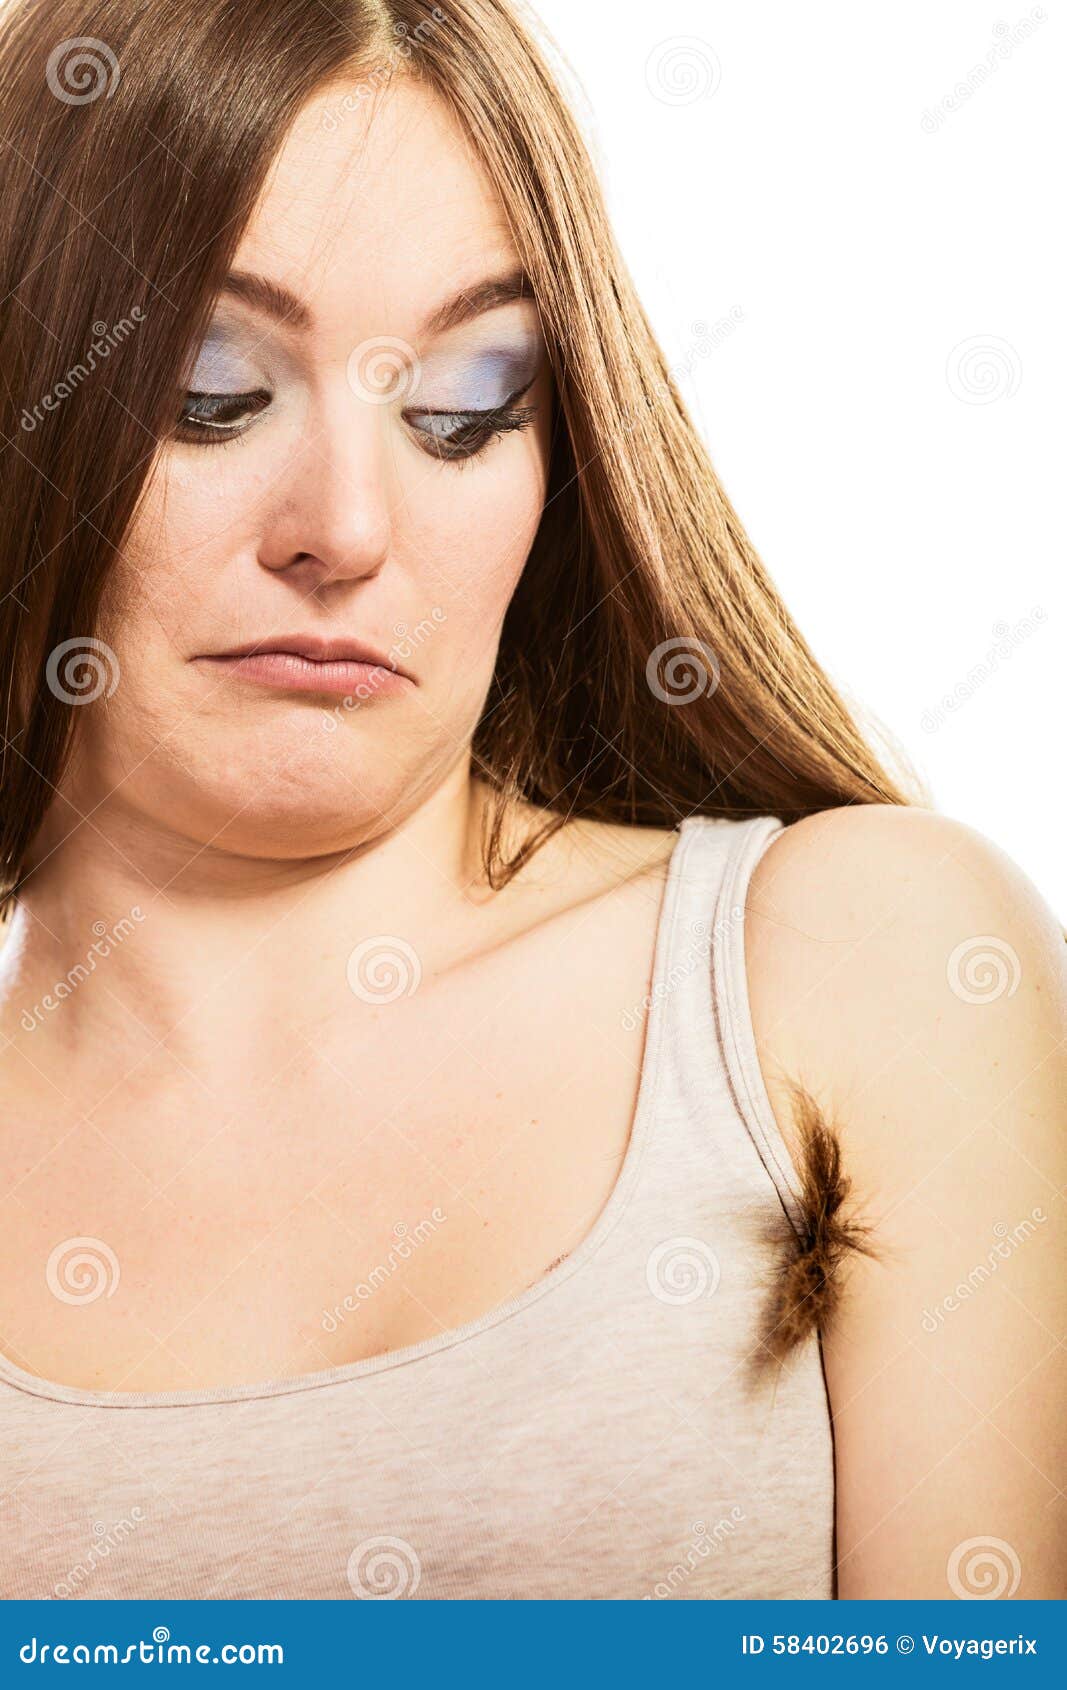 Funny Woman with Armpit Hair Stock Photo - Image of humor, funny: 58402696